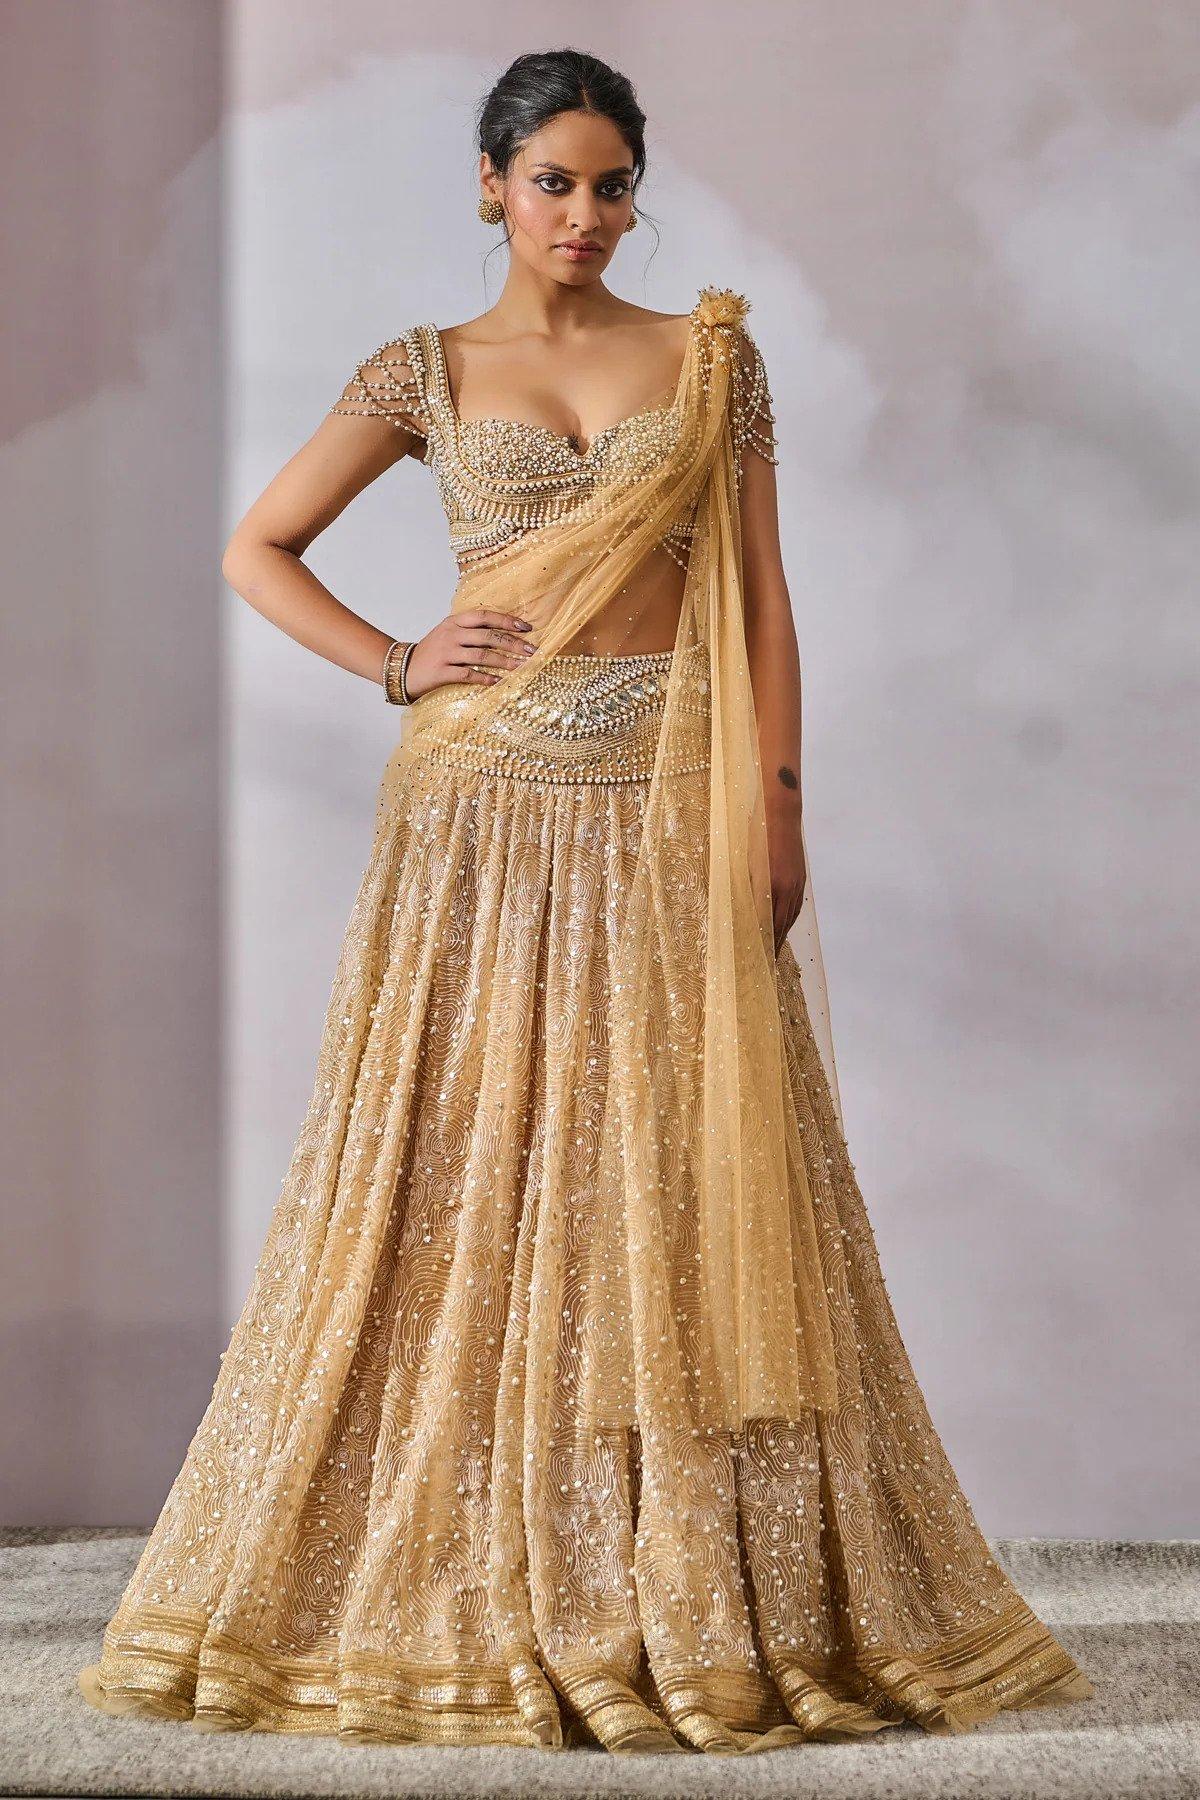 Photo of Haldi outfit ideas for brides-to-be